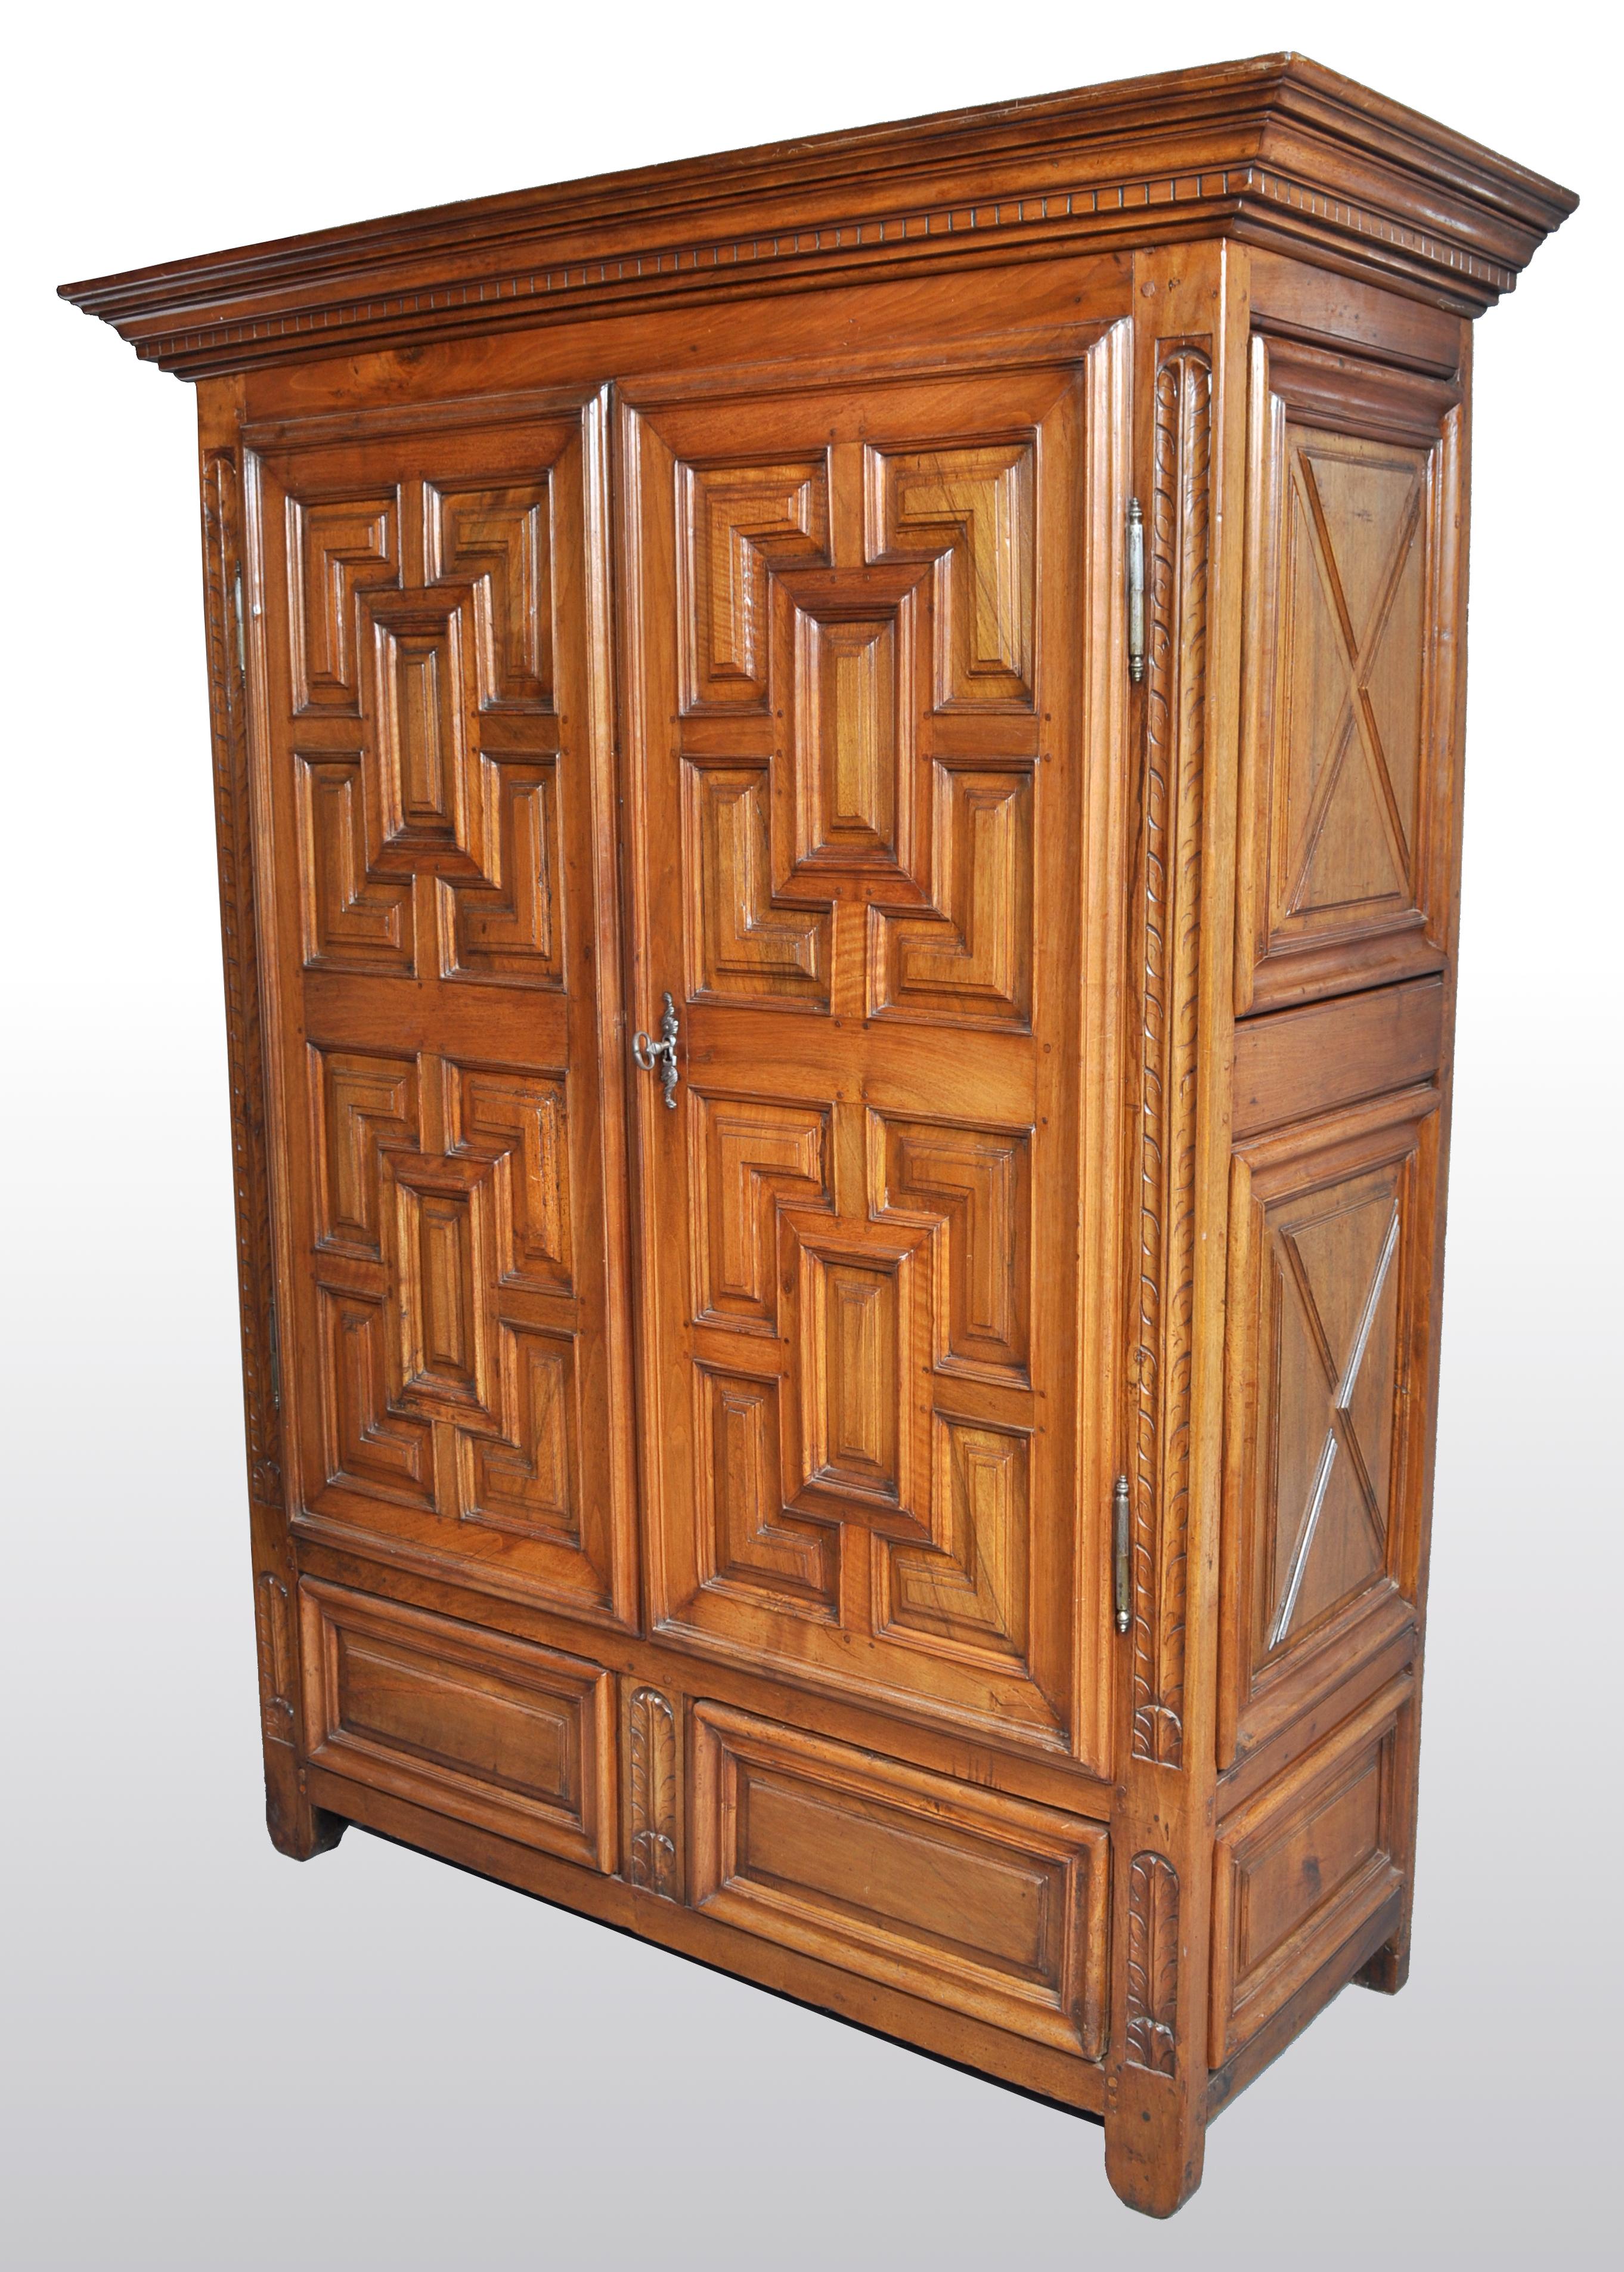 Antique French Provincial walnut armoire / cabinet, circa 1750. The armoire having a stepped cornice above a gallery of dentil molding, below a pair of panel doors having deeply carved geometric decoration and flanked by a pair of carved acanthus